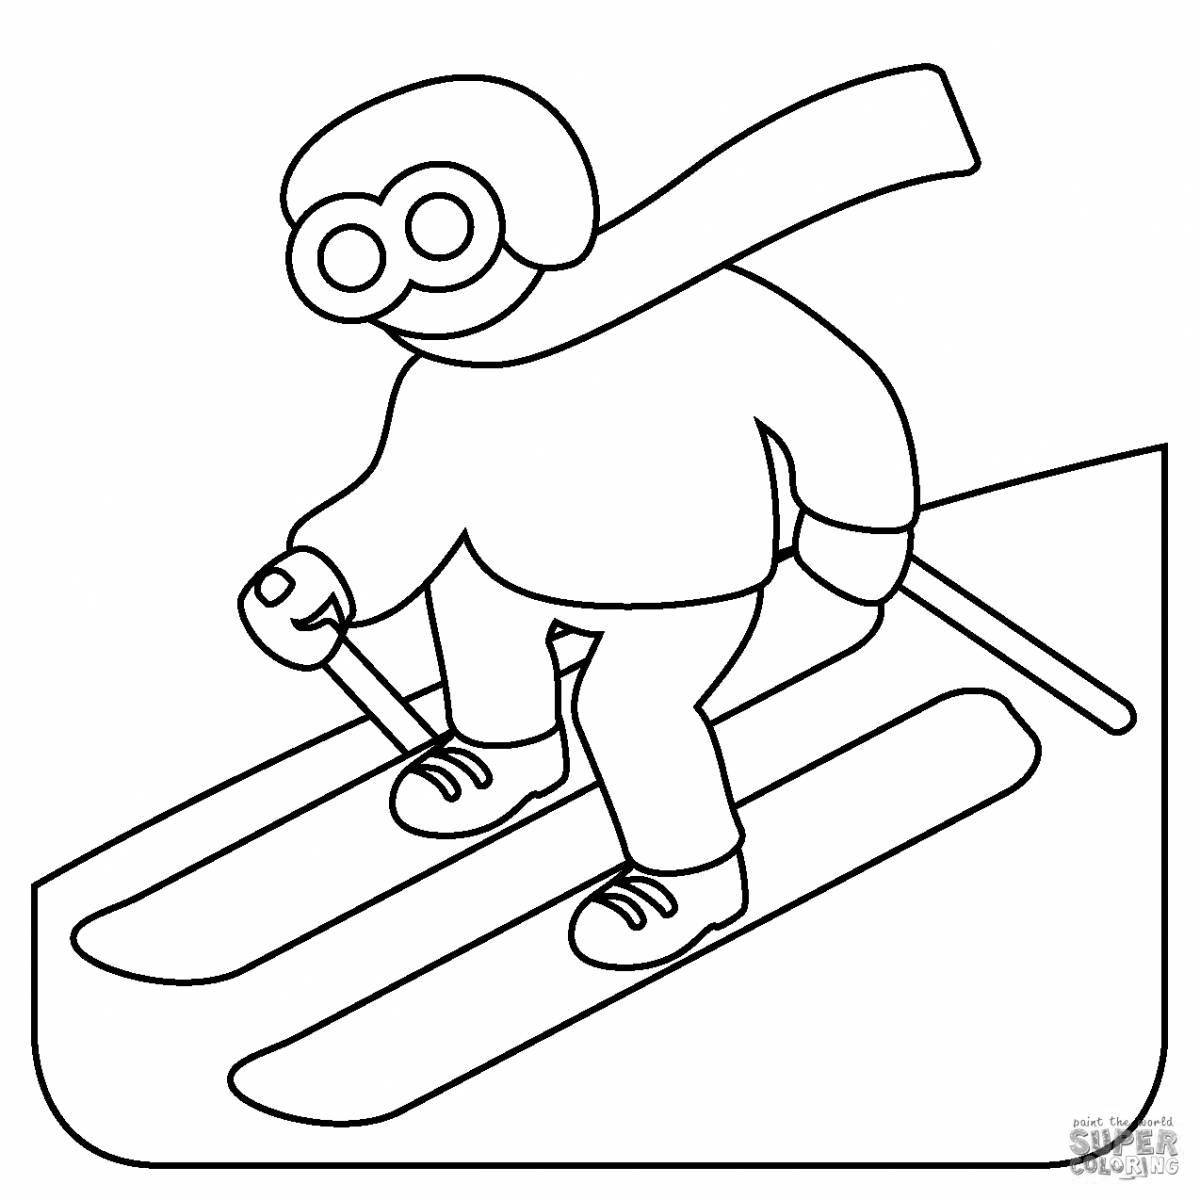 Dynamic skier coloring book for kids 6-7 years old